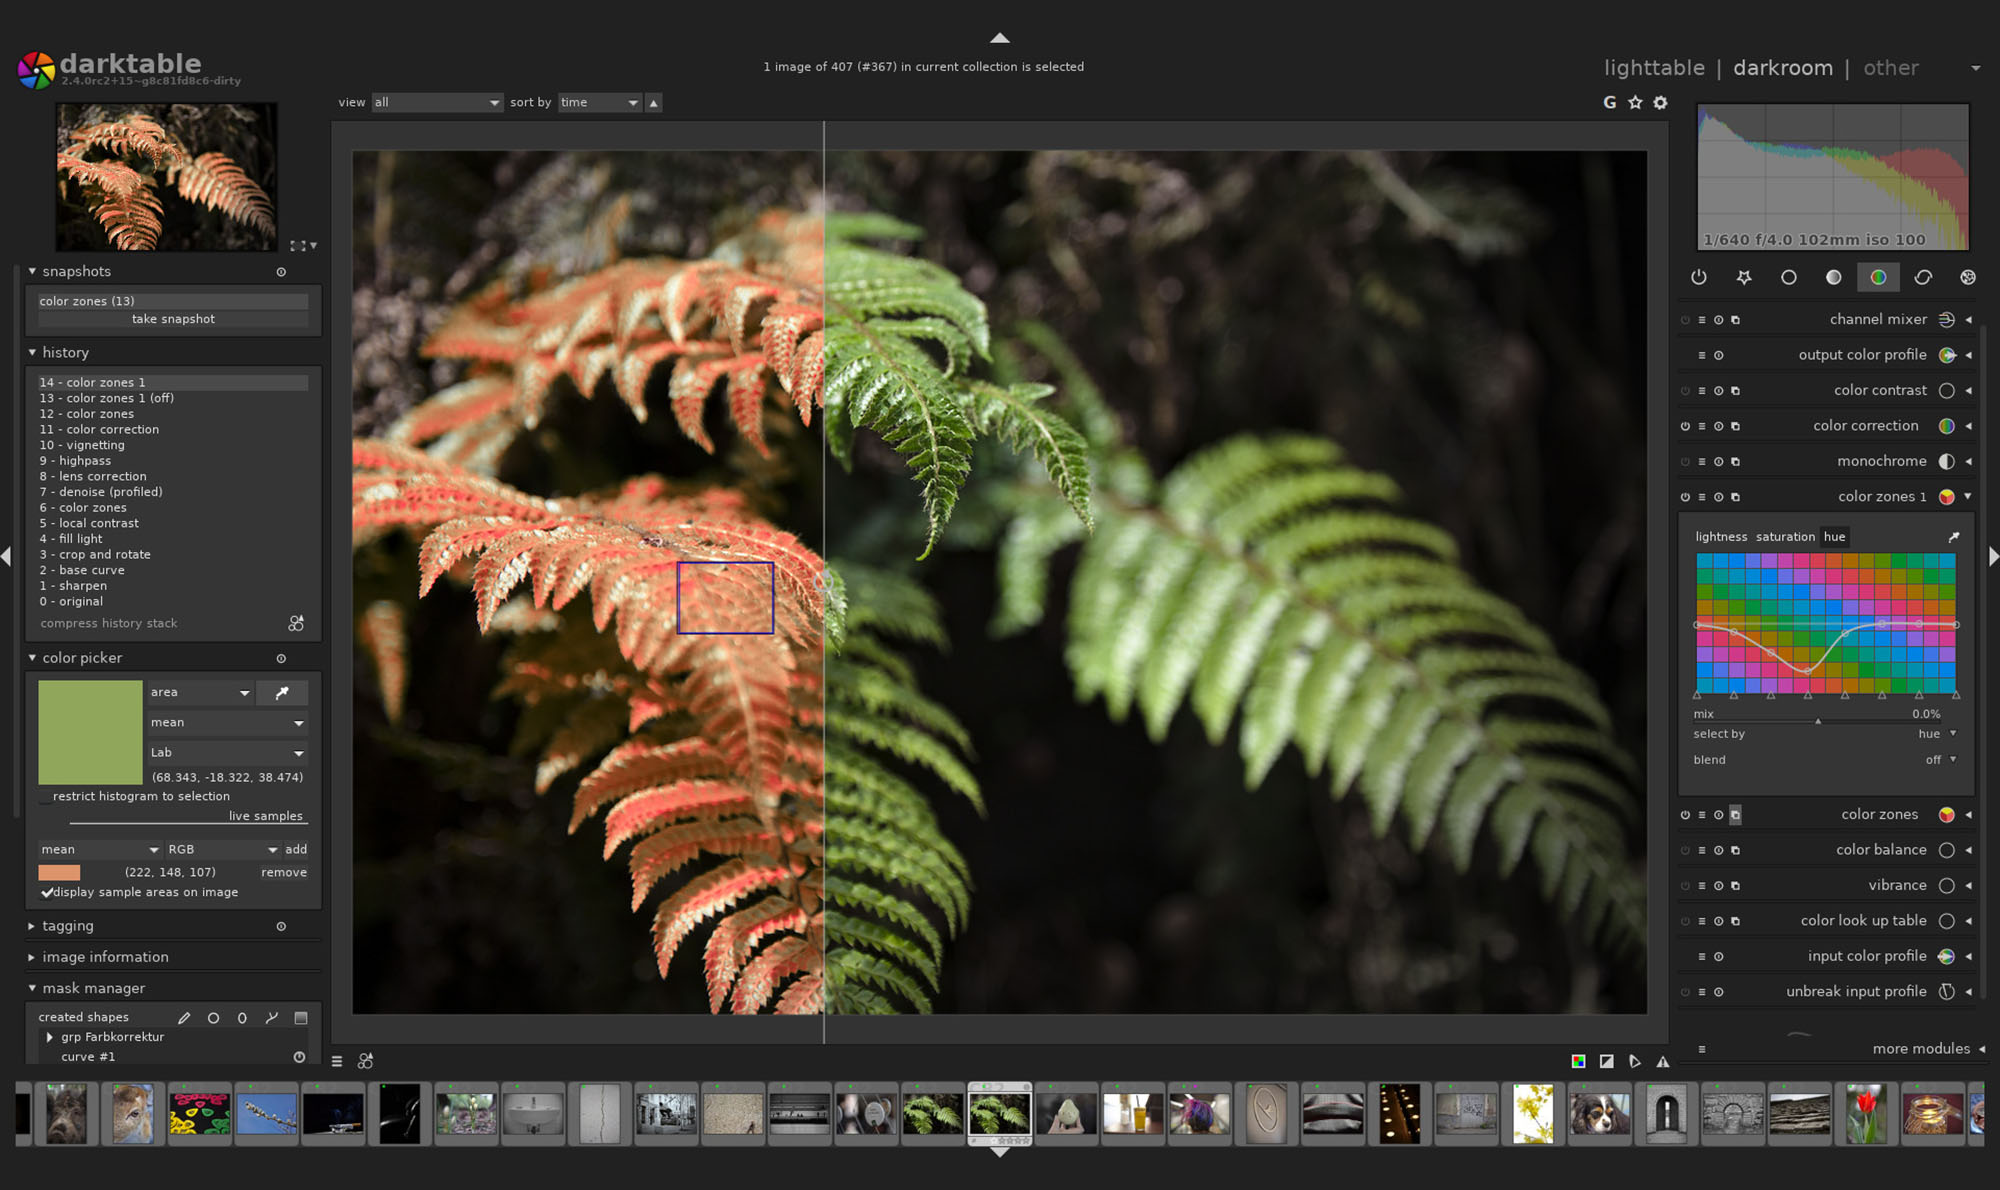 darktable 4.4.0 download the new